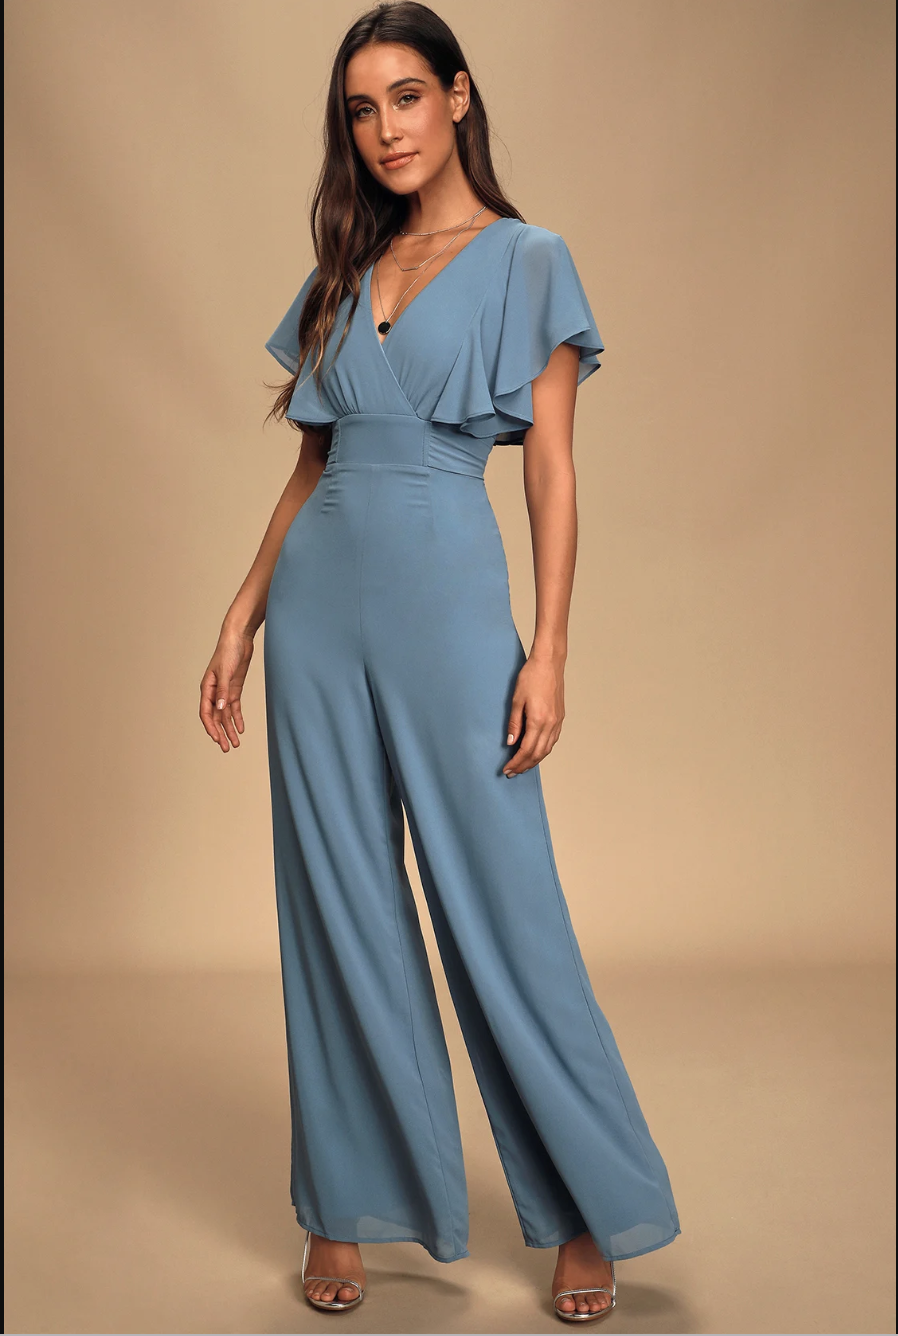 pretty jumpsuits for weddings